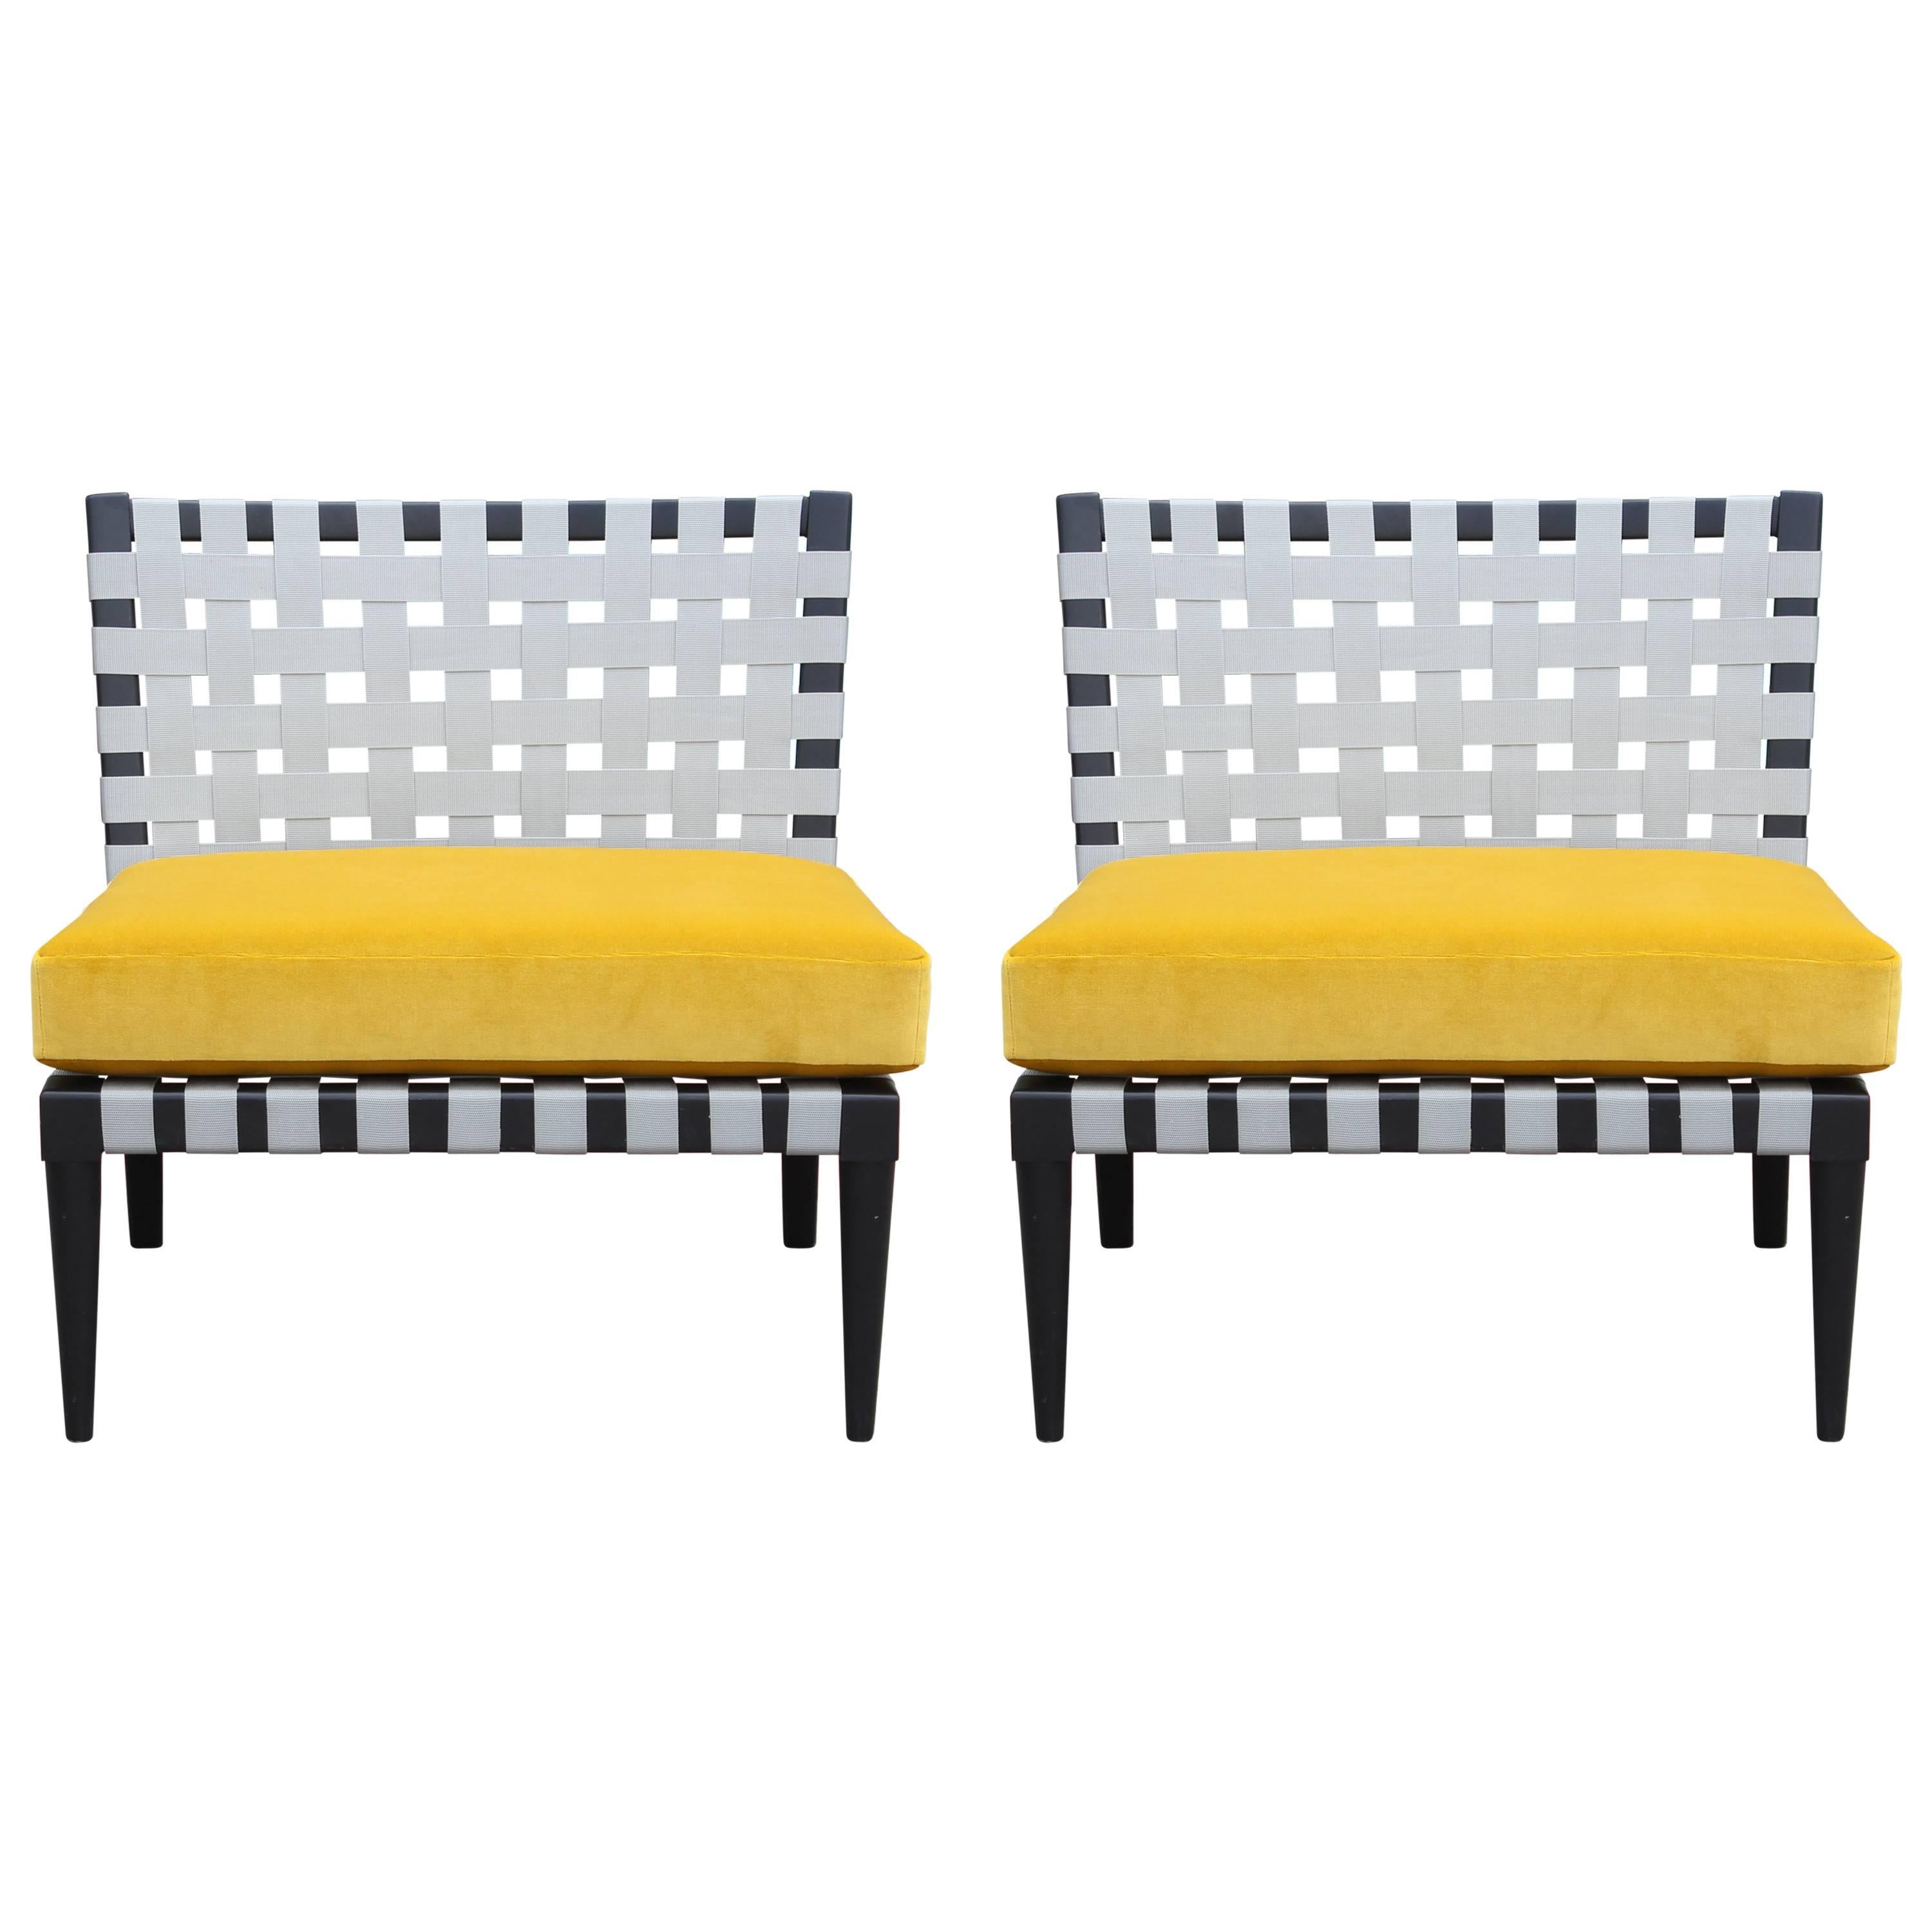 Pair of Modern Vincent Wolf Grey Strap Chairs in Yellow Velvet by Niedermaier